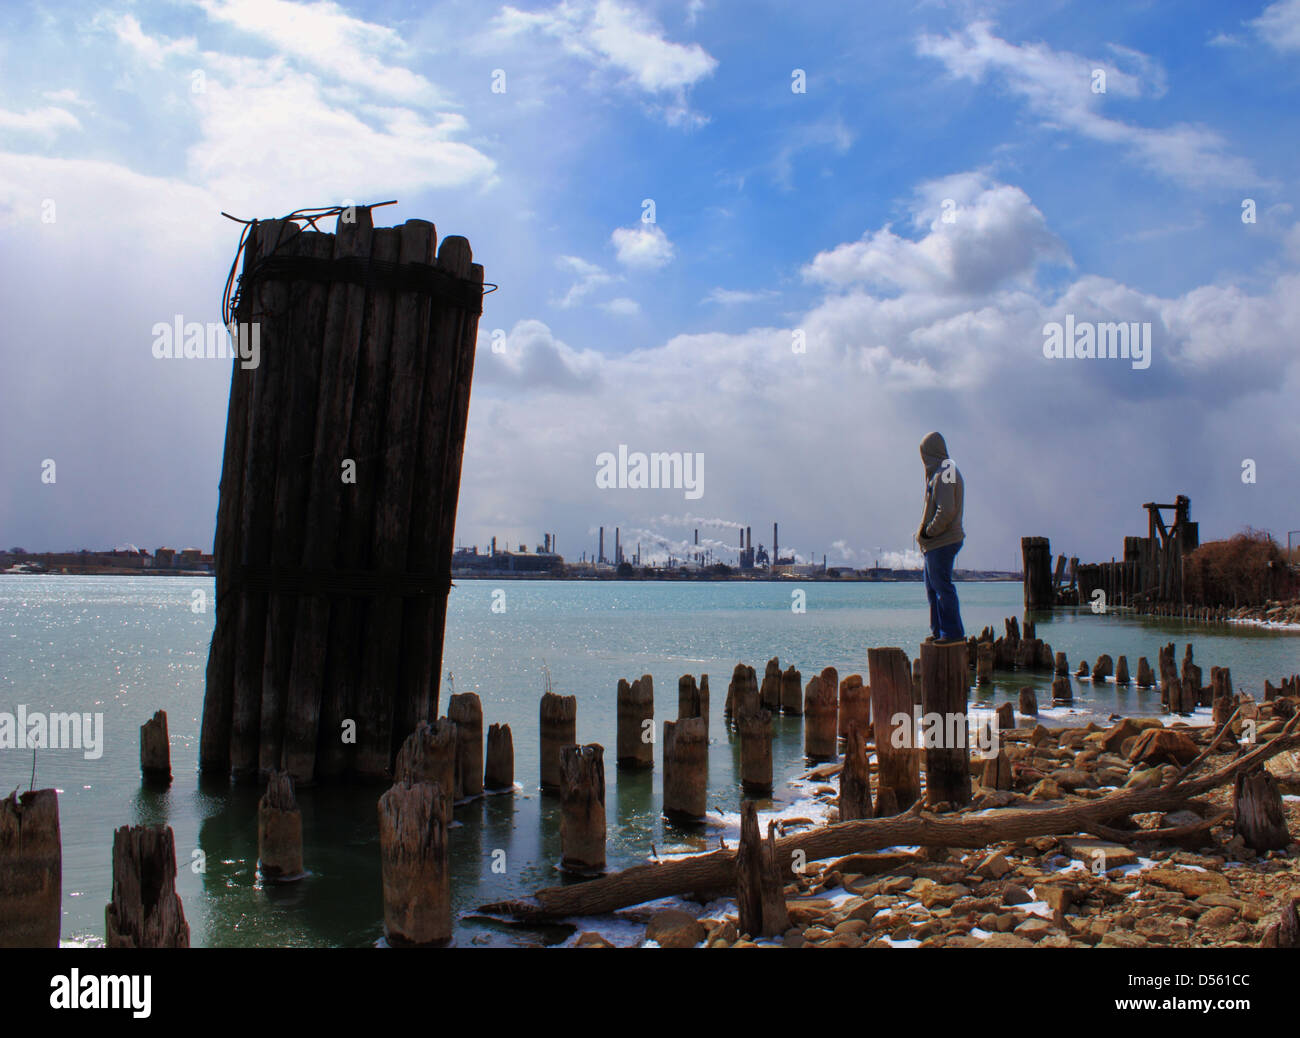 Teenager with factories and smokestacks in the background. Evidence of water pollution in the foreground. Stock Photo